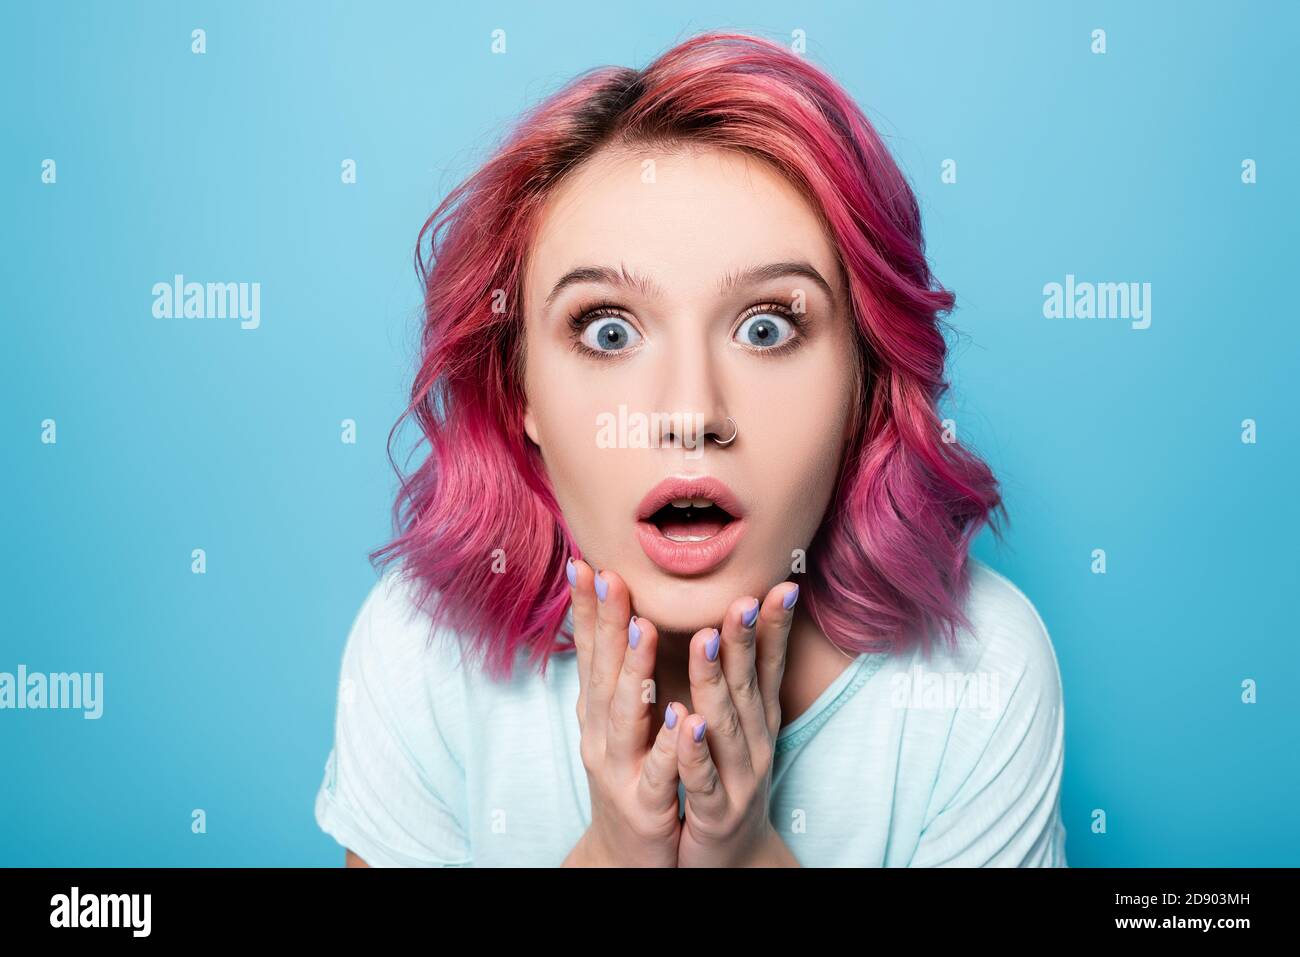 scared young woman with pink hair on blue background Stock Photo